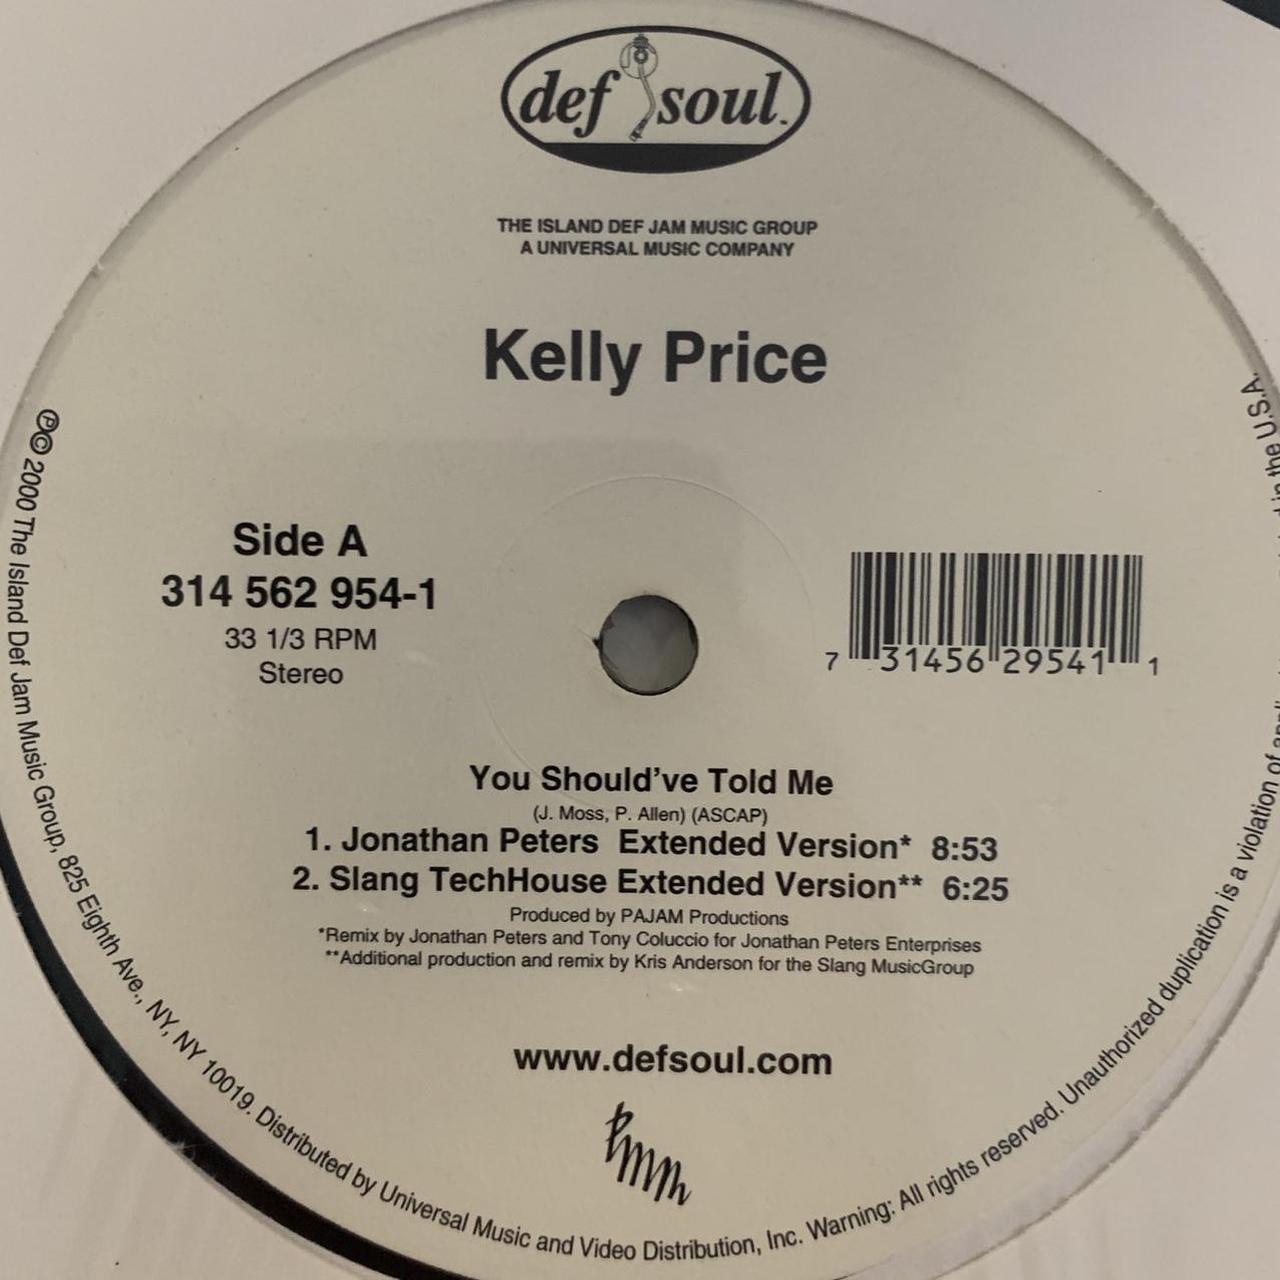 Kelly Price “You Should’ve Told Me” 4 Version 12inch Vinyl, Featuring Jonathan Peter's Extended Version, Slang TechHouse Extended Version and Instrumentals